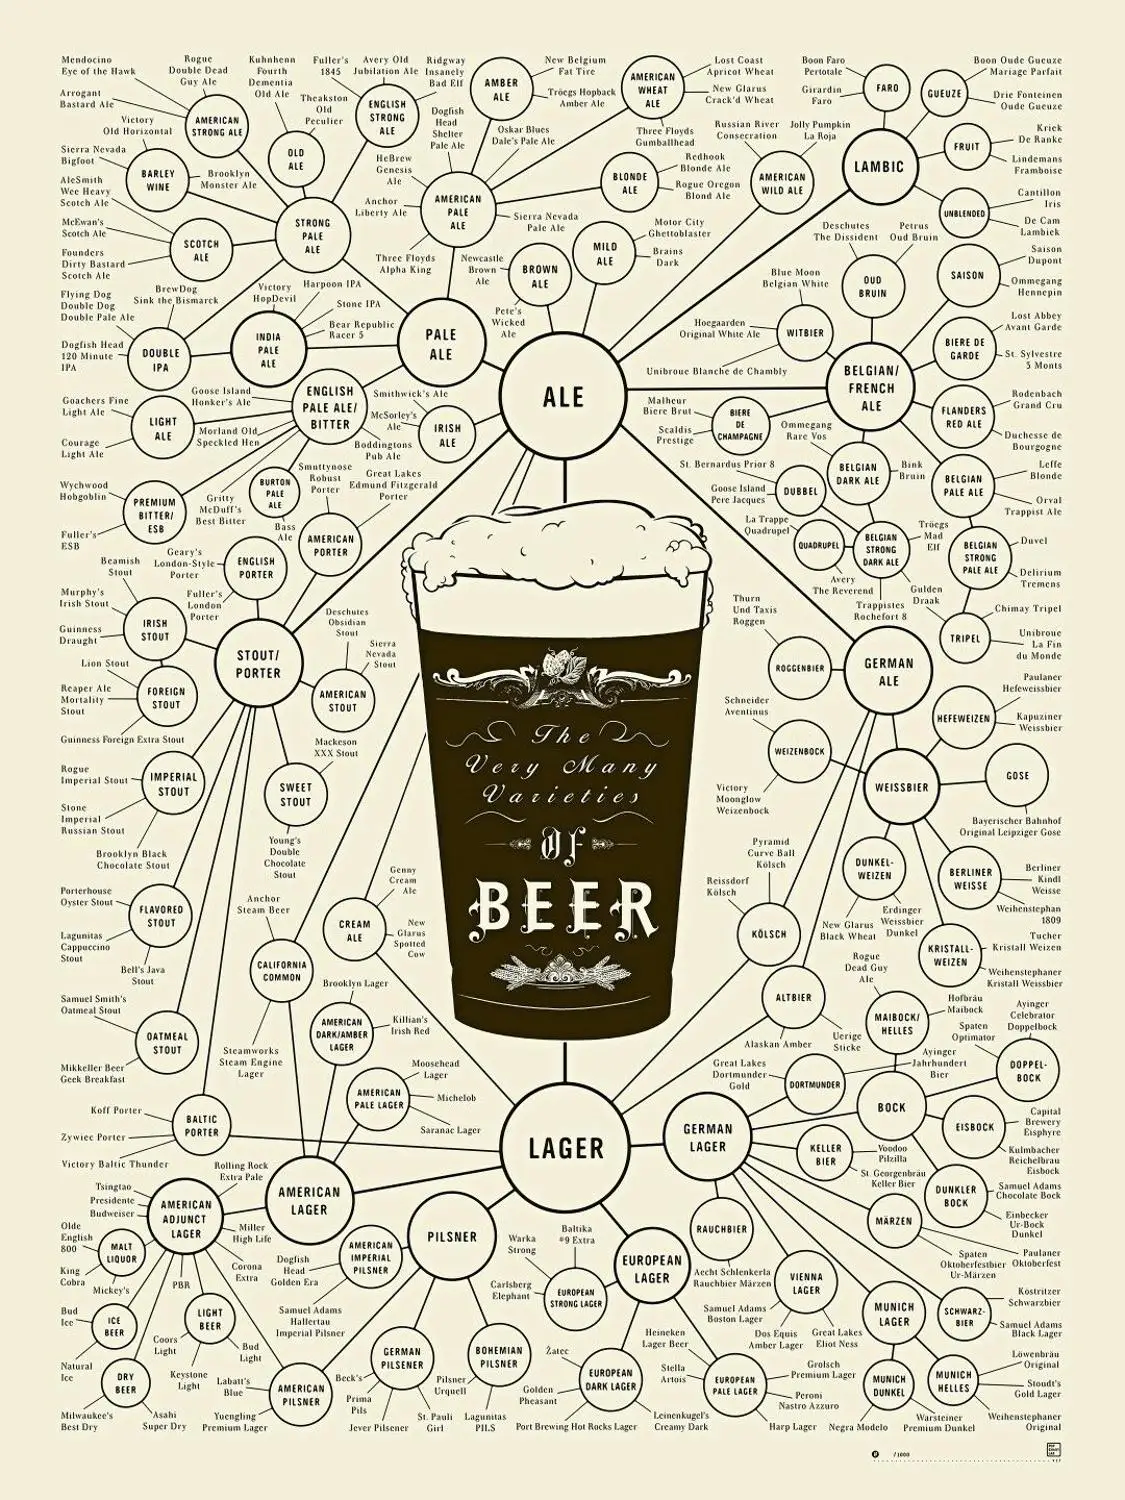 

NEW THE VARITES OF BEER COLLEGE UNI GUIDE CHART MAN Art print Silk poster Home Wall Decor